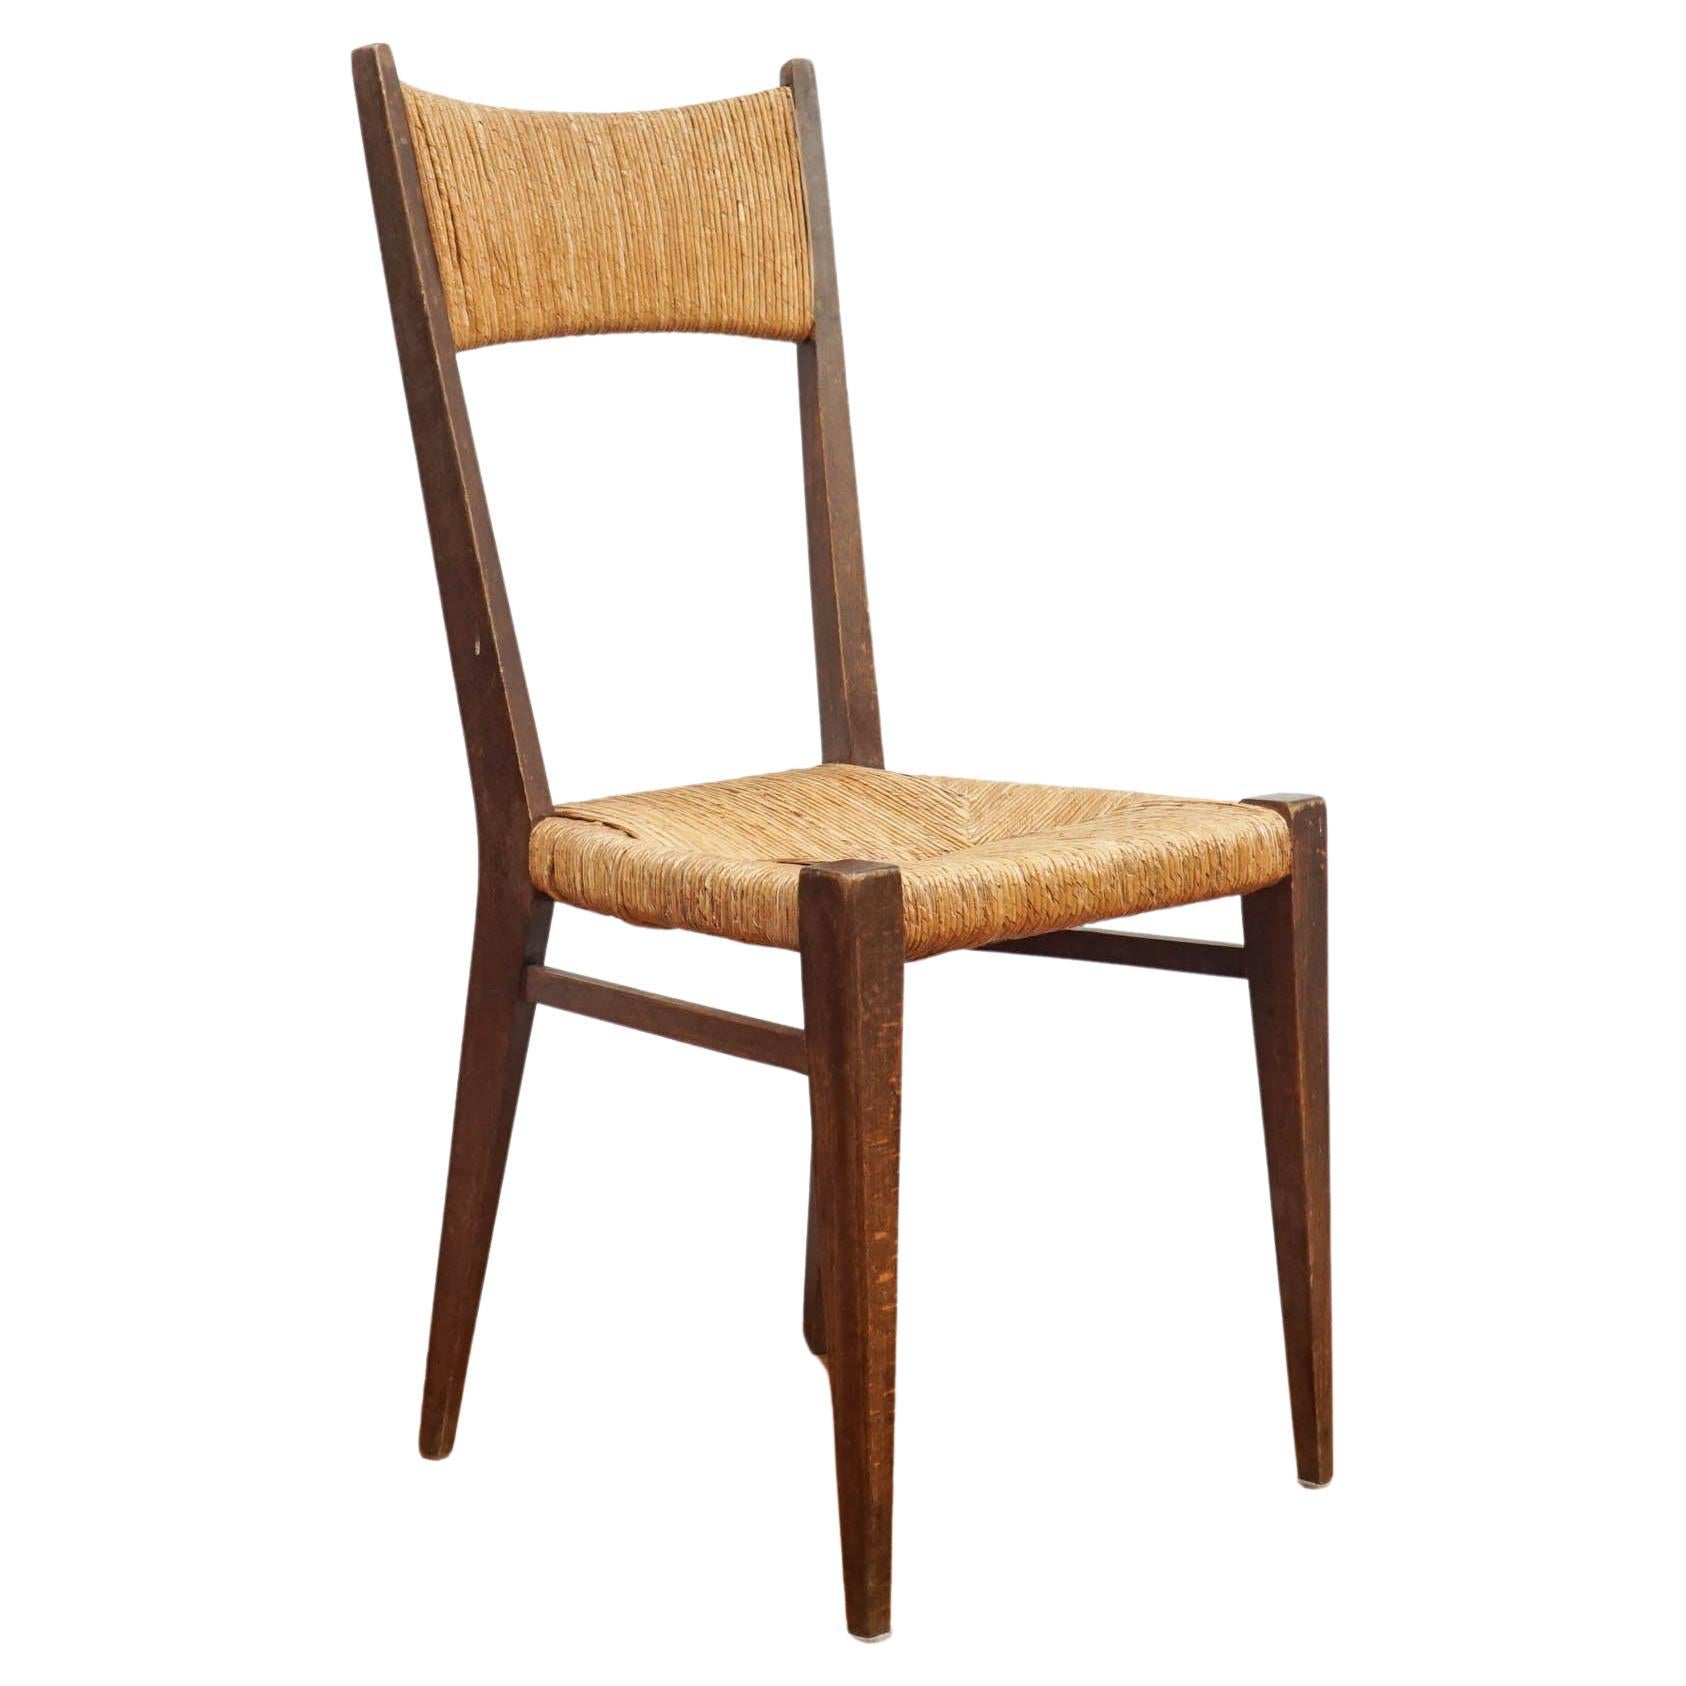 Woven Dining Chairs For Sale